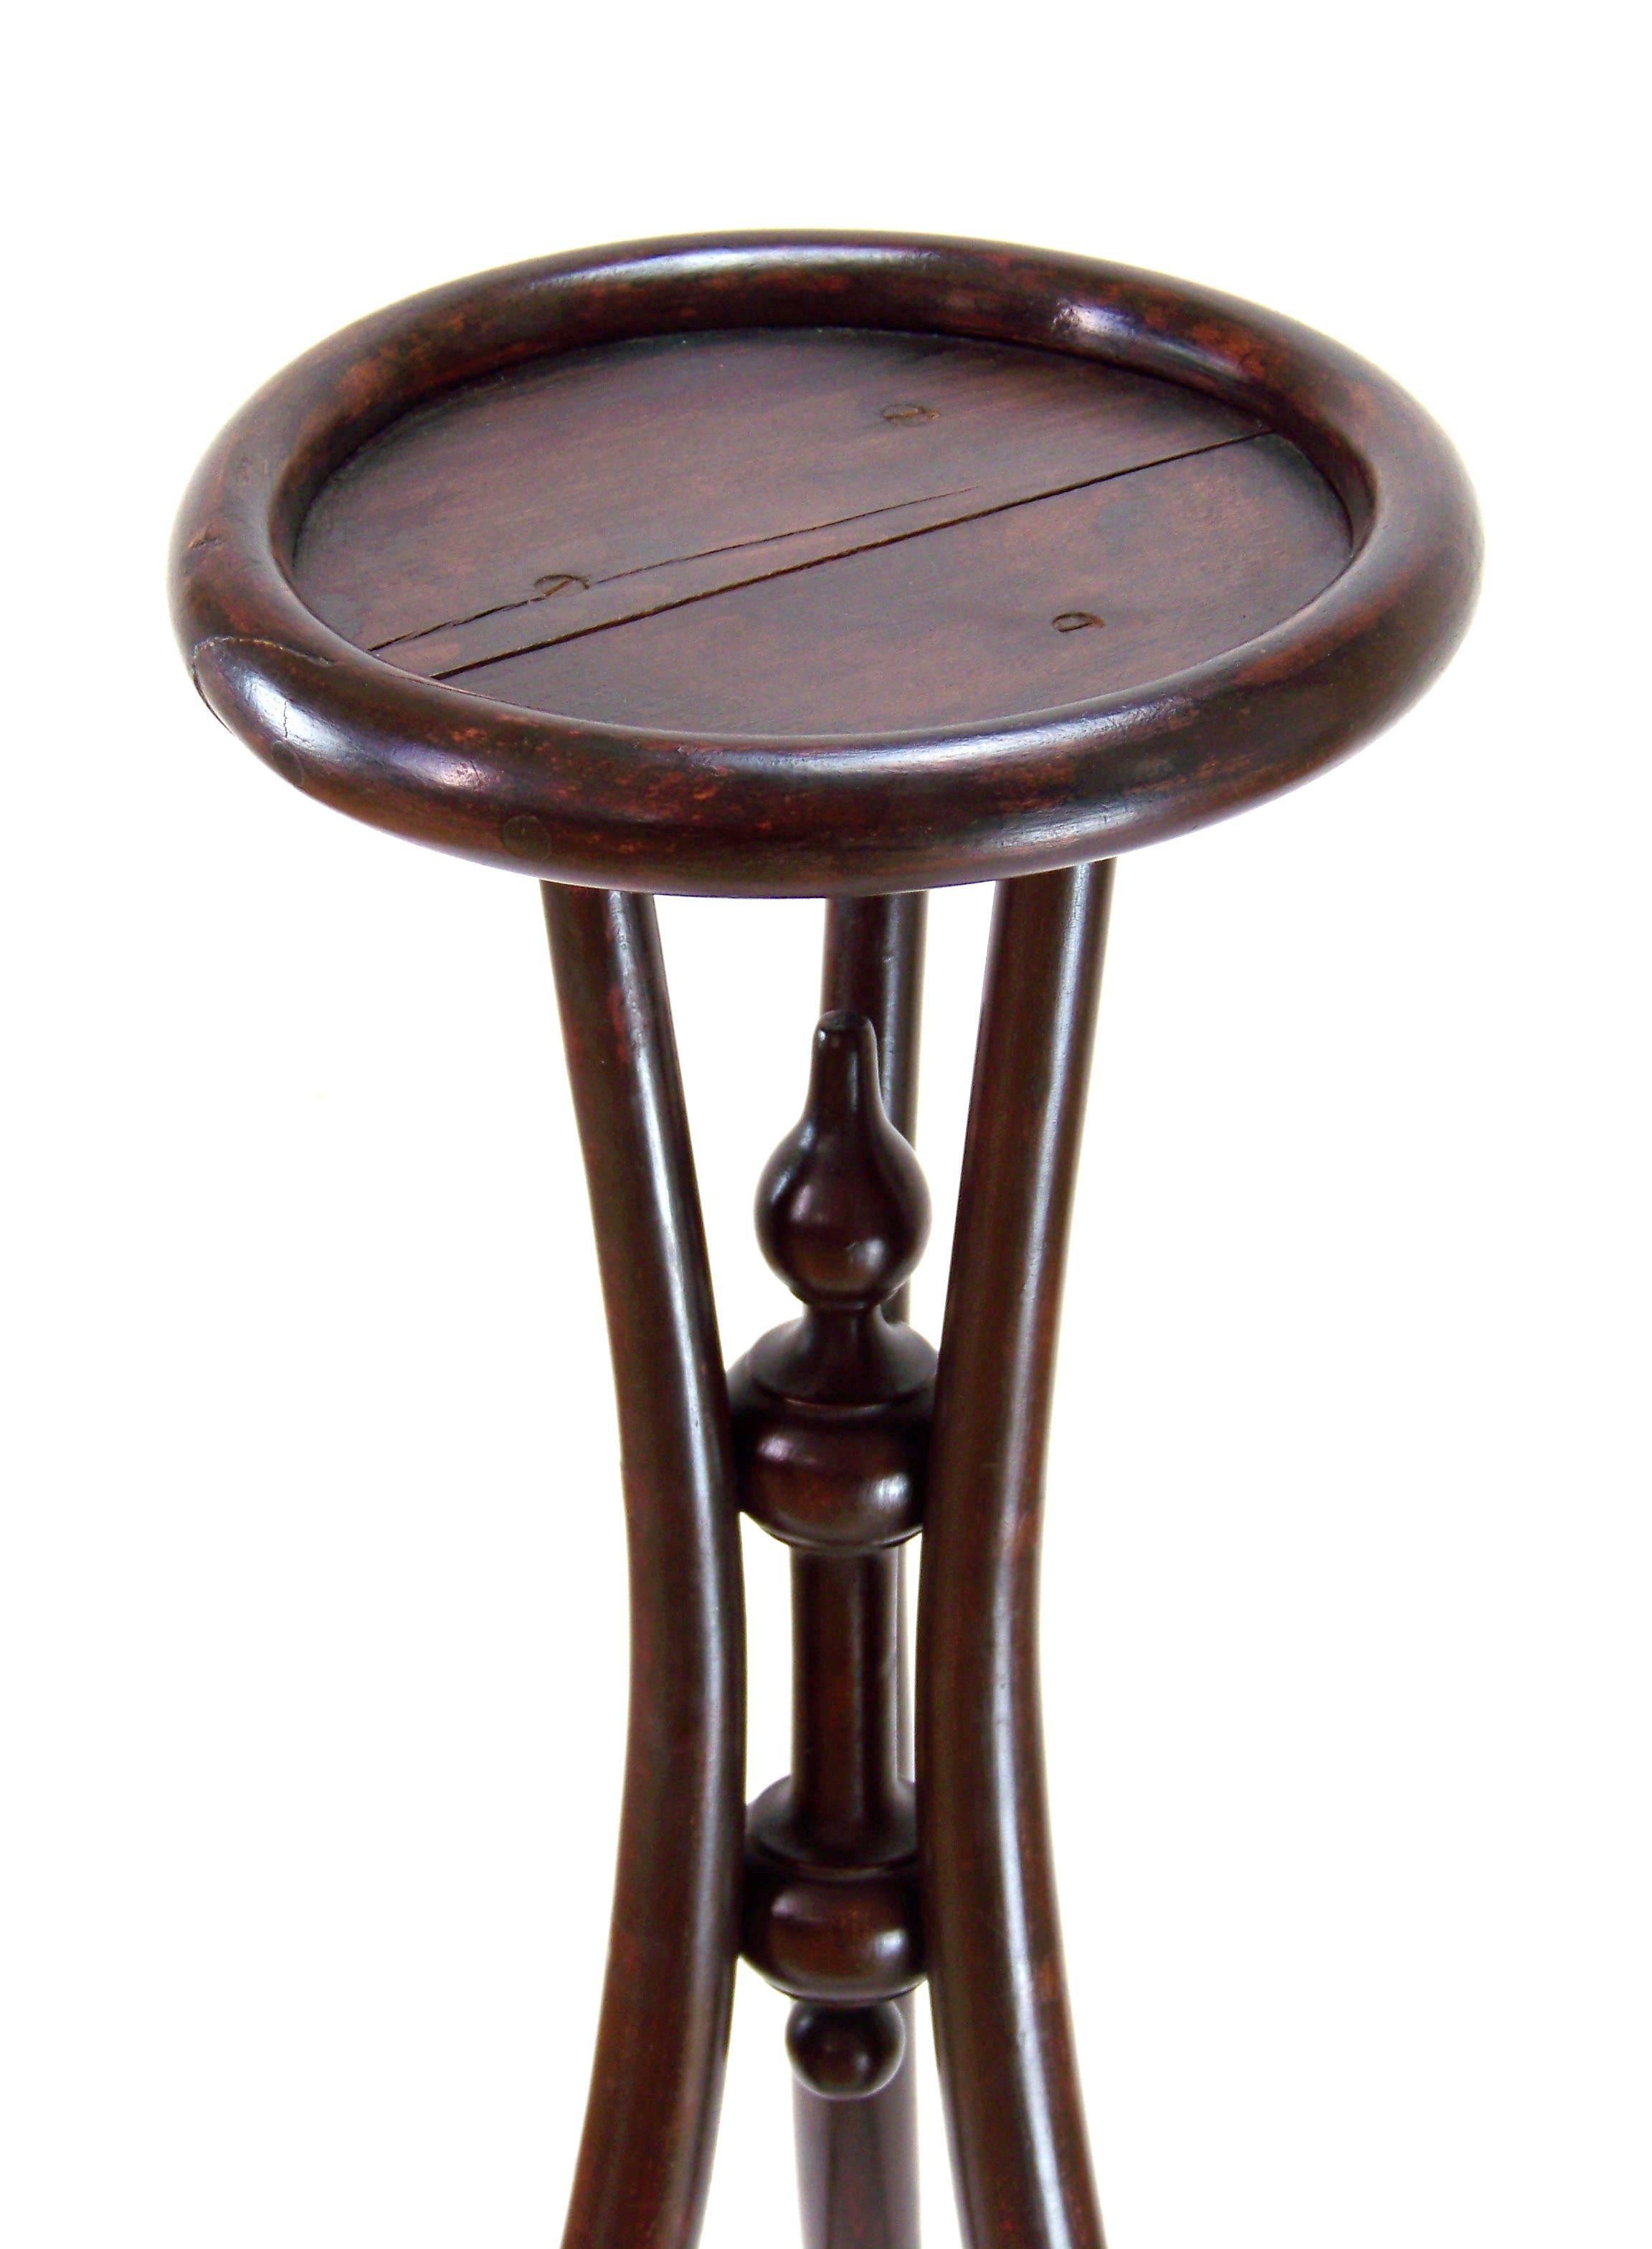 Viennese flower table was manufactured in Austria by the Gebrüder Thonet company. In the production program was included in the year 1892. Original state with signs of use. Marked with stamp 